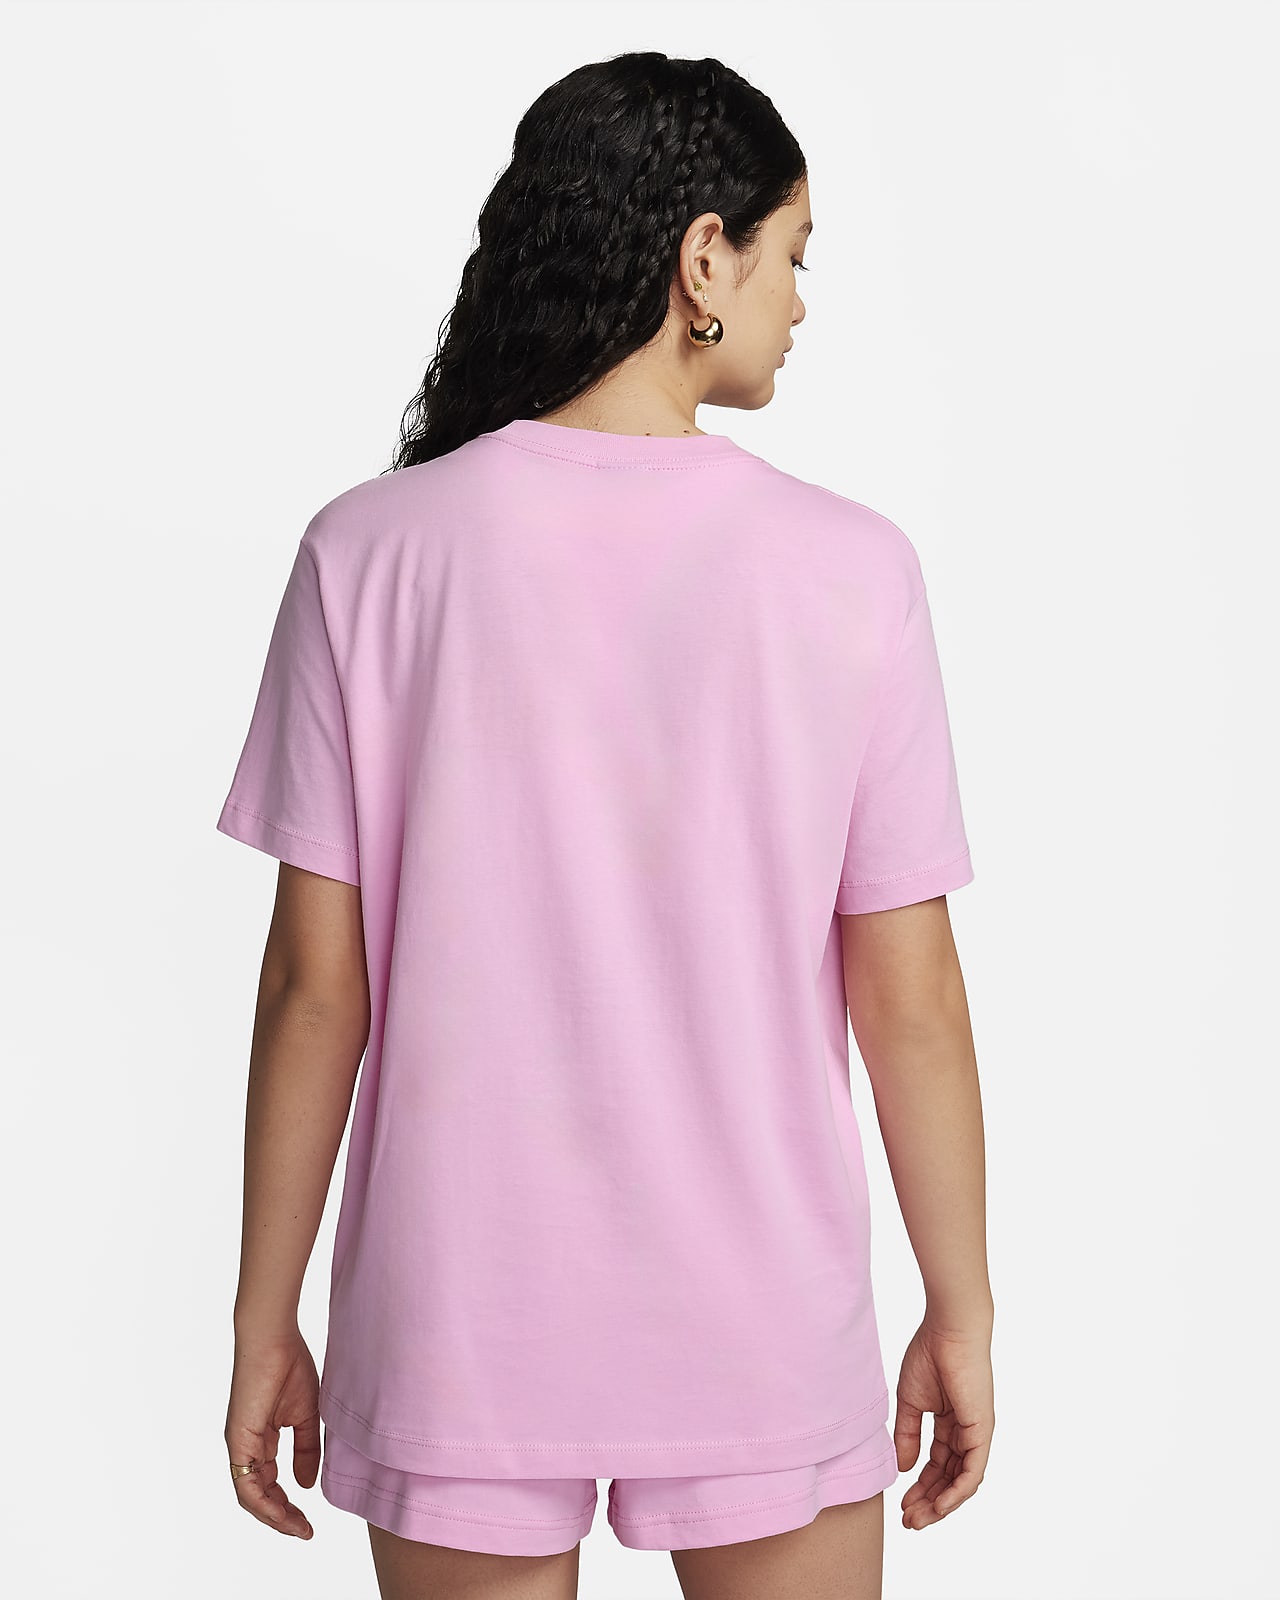 Women's Nike T-Shirts: Top Off Your Active Look with Nike Tees